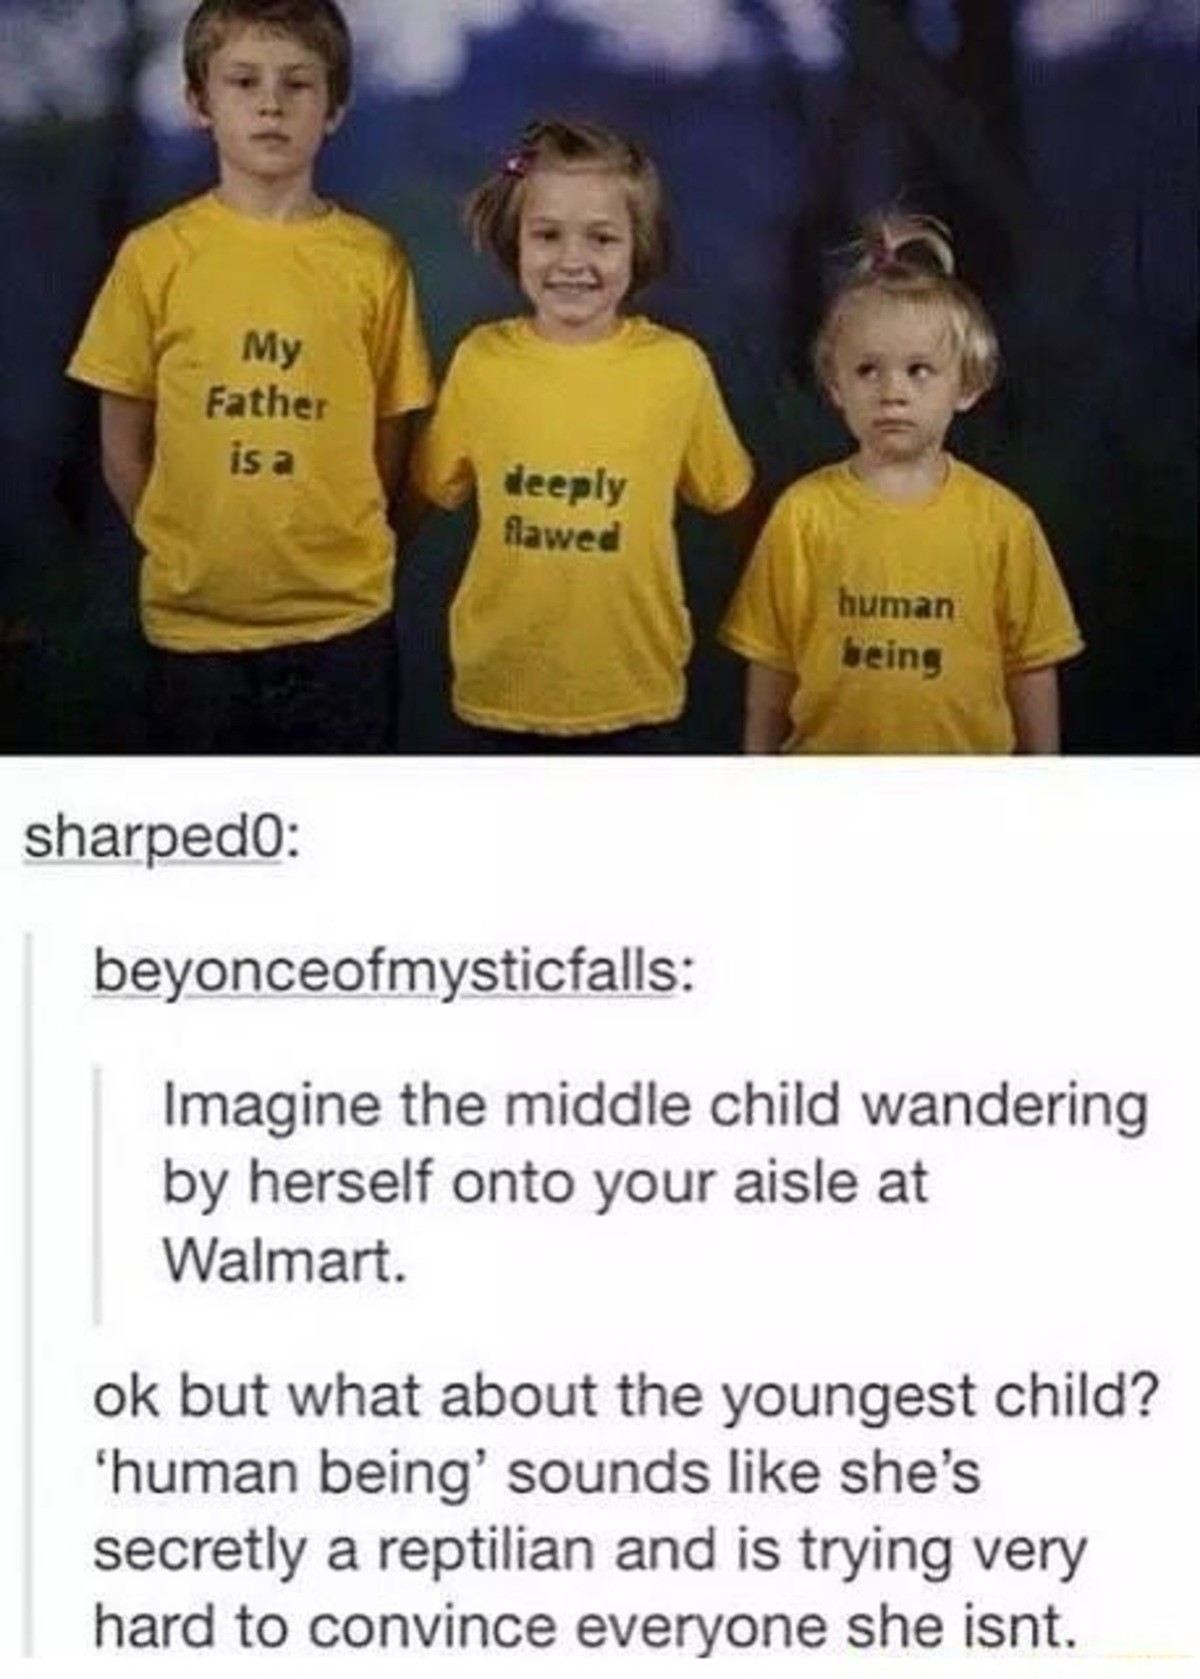 These shirts. . shar_ pedo: Imagine the middle child wandering by herself onto your aisle at Walmart. but what about the youngest child? human being’ sounds lik